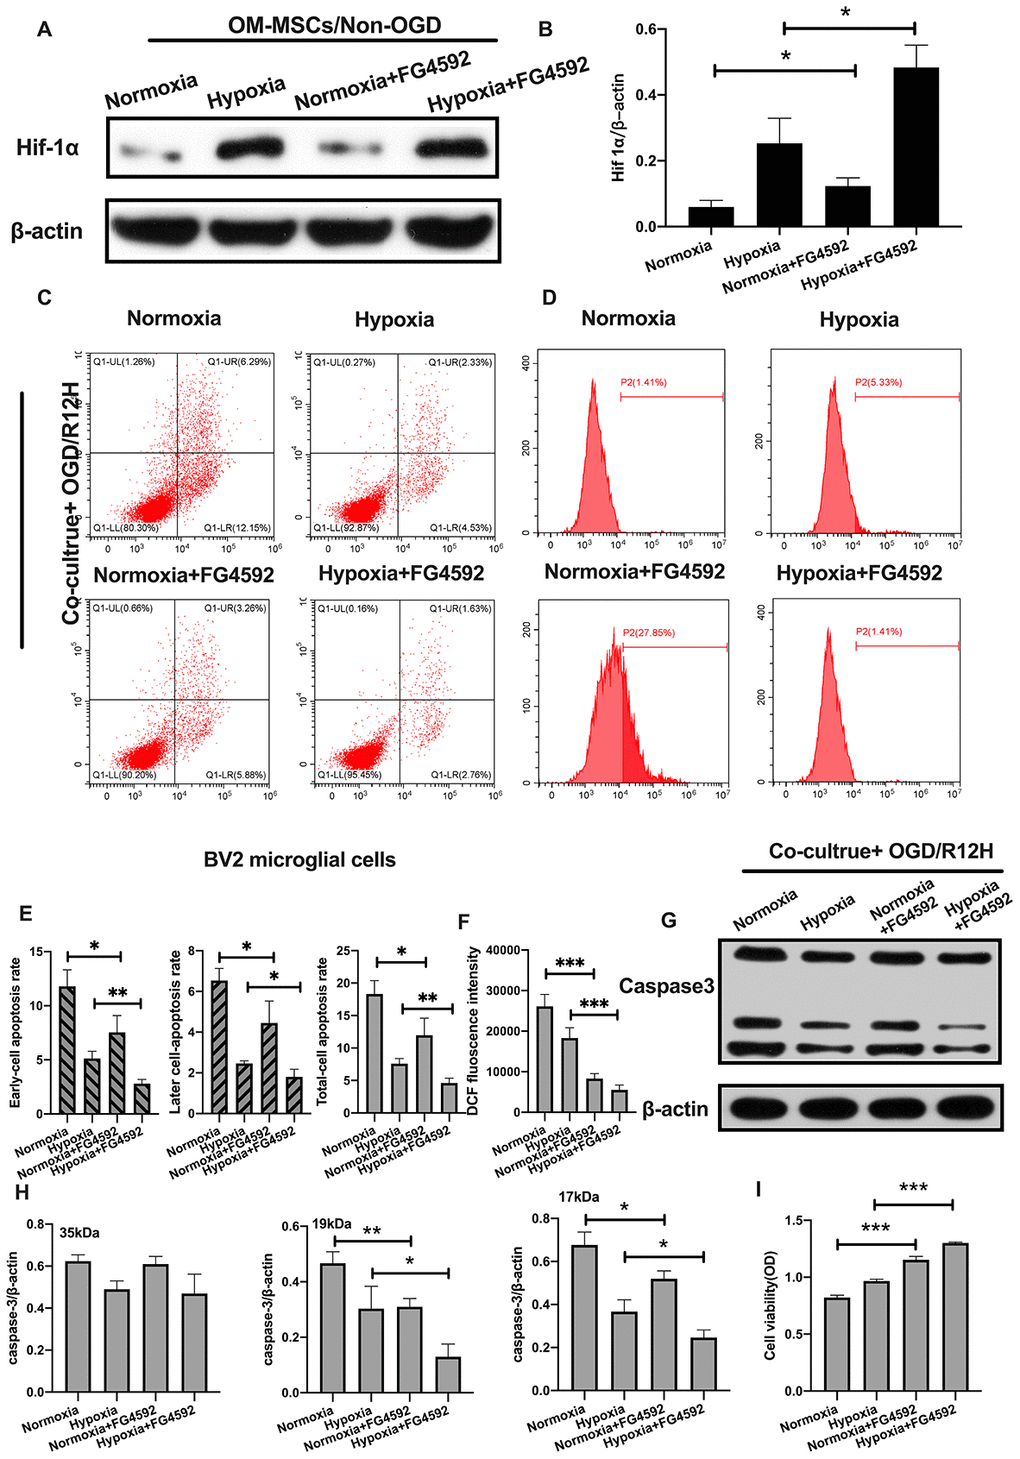 Induction of HIF-1α in OM-MSCs by FG-4592 inhibited cerebral OGD/R-induced apoptosis in BV2 microglial cells. (A, B) The successful overexpression of HIF-1α in OM-MSCs was confirmed by Western blotting. (C, E) The apoptosis rate of BV2 microglial cells was determined by flow cytometry with Annexin V/PI staining in each group. (D, F) Production of ROS levels in BV2 microglial cells was measured by flow cytometry. (G, H) The protein expression of caspase3 in BV2 microglial cells was quantified by Western blotting analysis. (I) The viability of BV2 microglial cells was evaluated with MTT assay. All data are presented as the mean value ±SD. *p